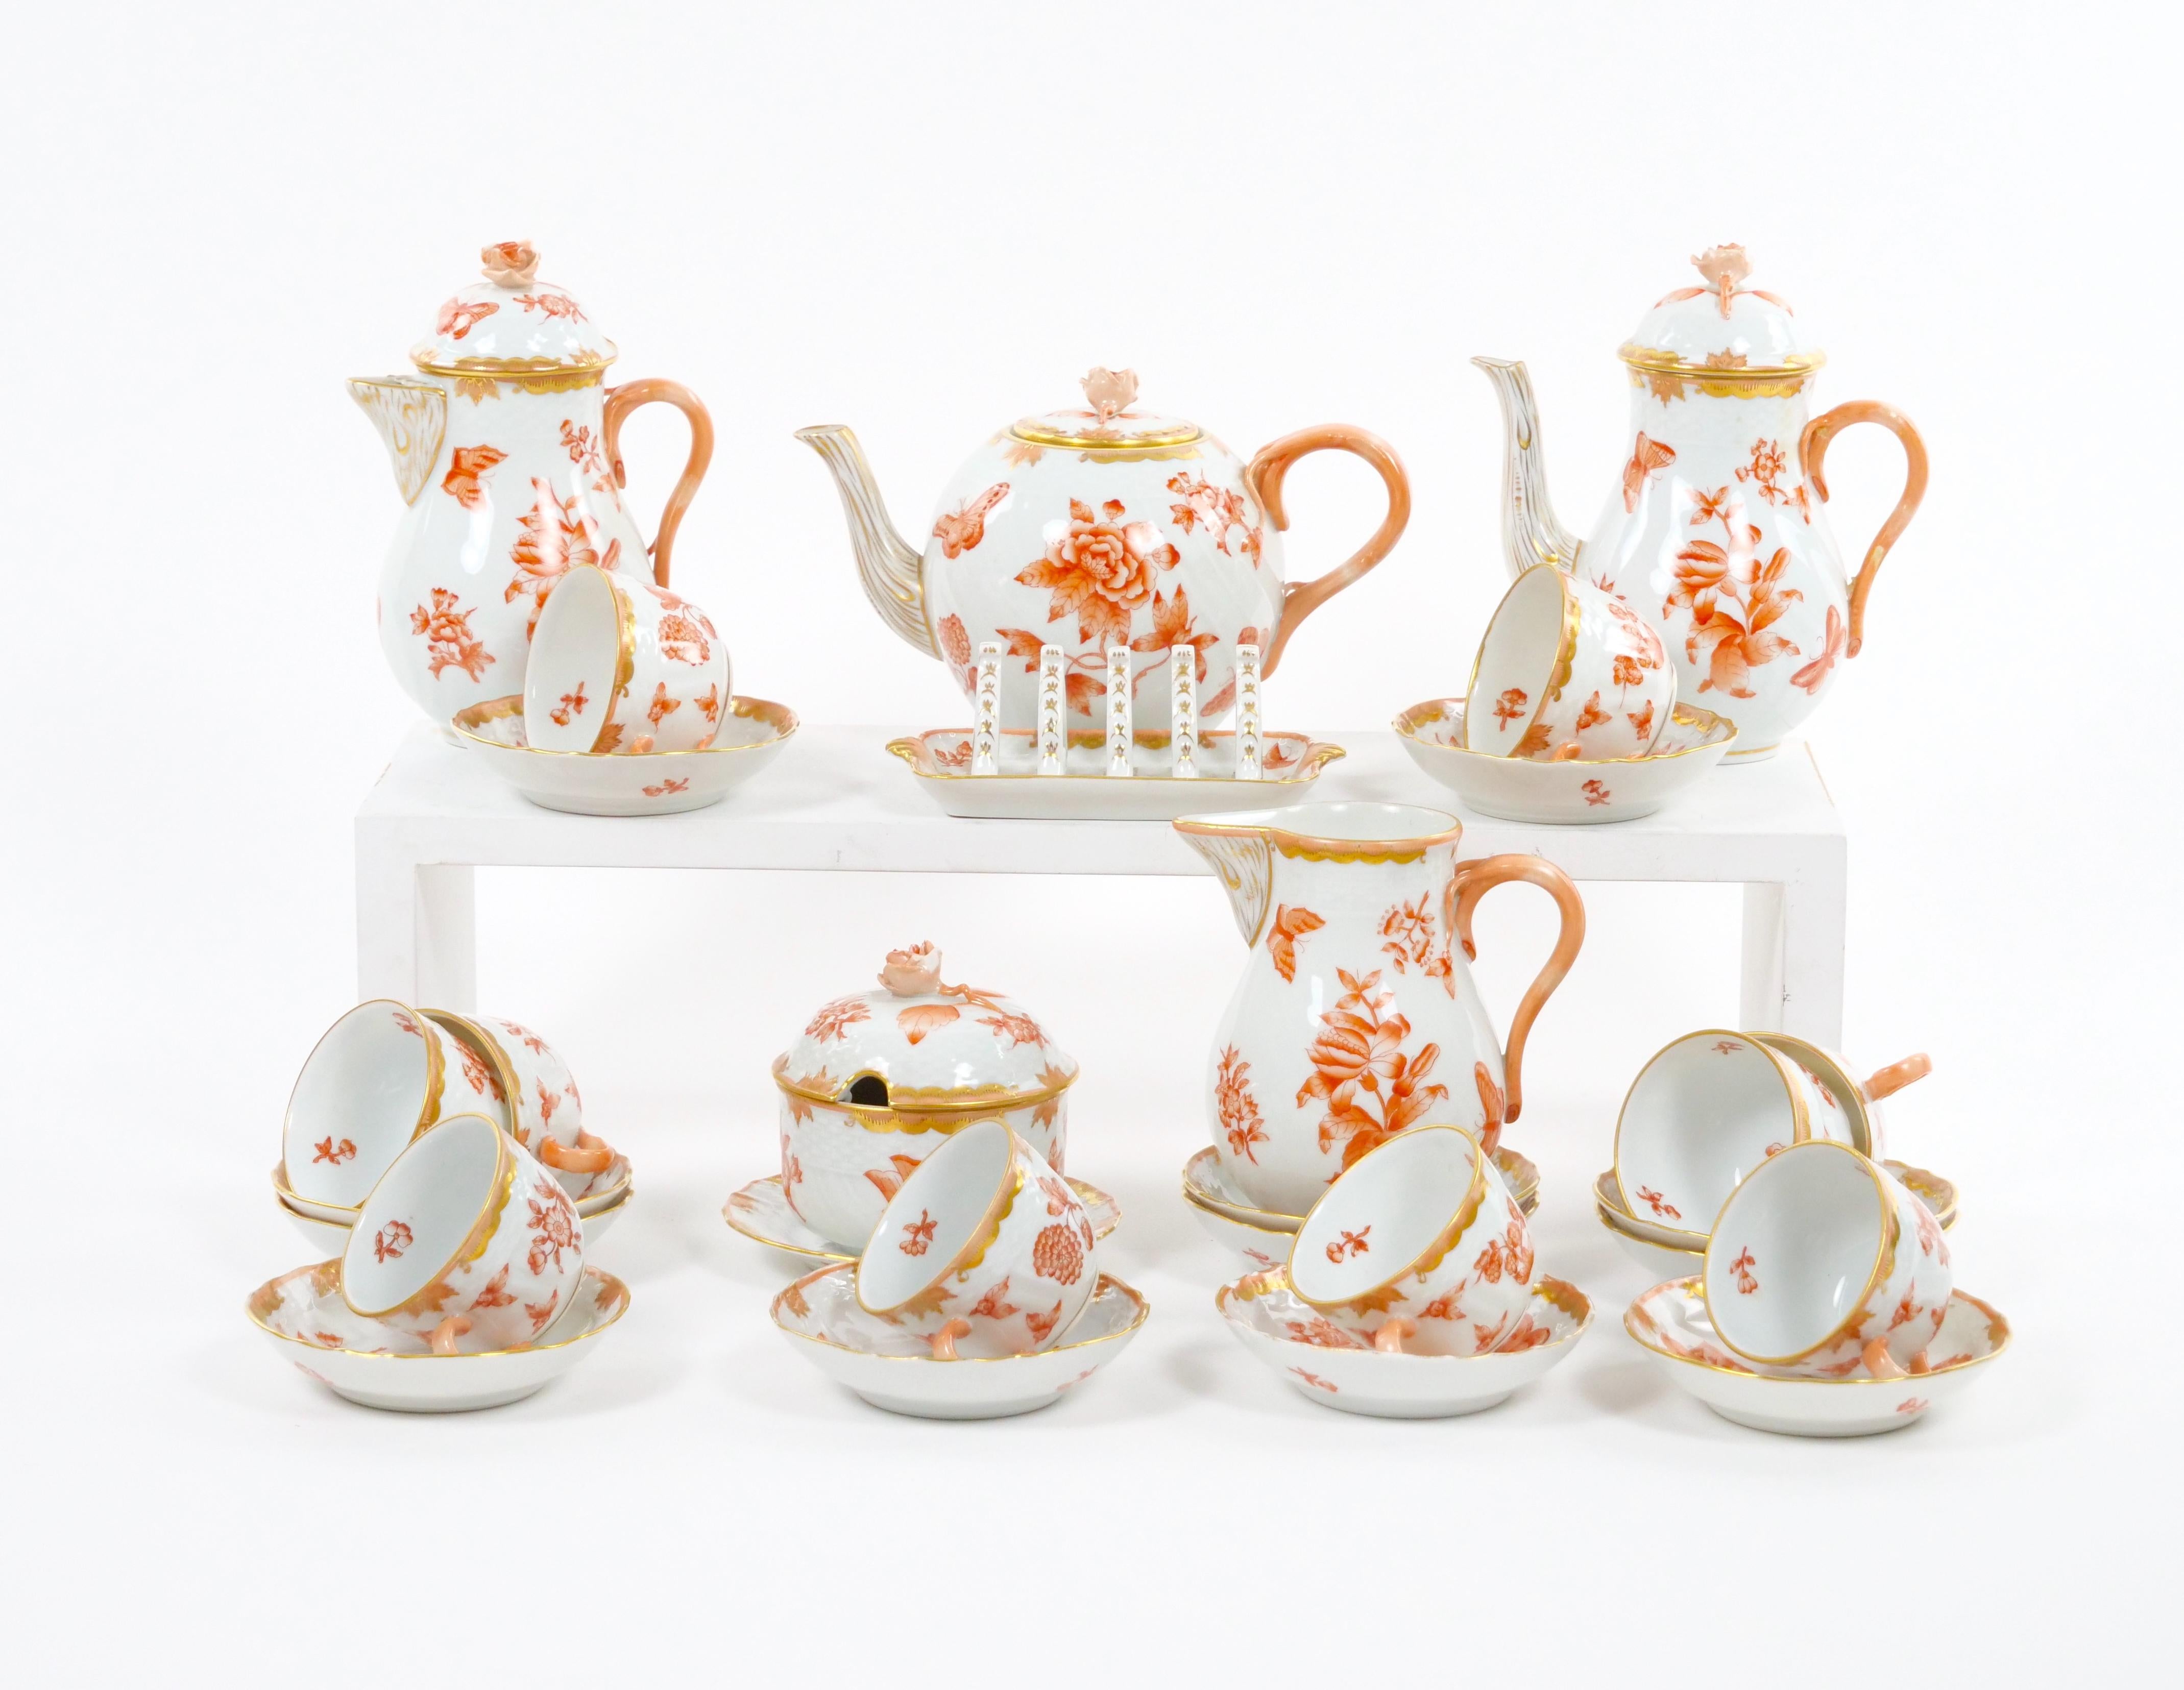 
Introducing an extraordinary Hungarian hand-painted and gilt decorated coffee service by Herend, renowned for their exquisite craftsmanship. This magnificent glazed porcelain set, designed to accommodate ten people, combines elegance, artistry, and